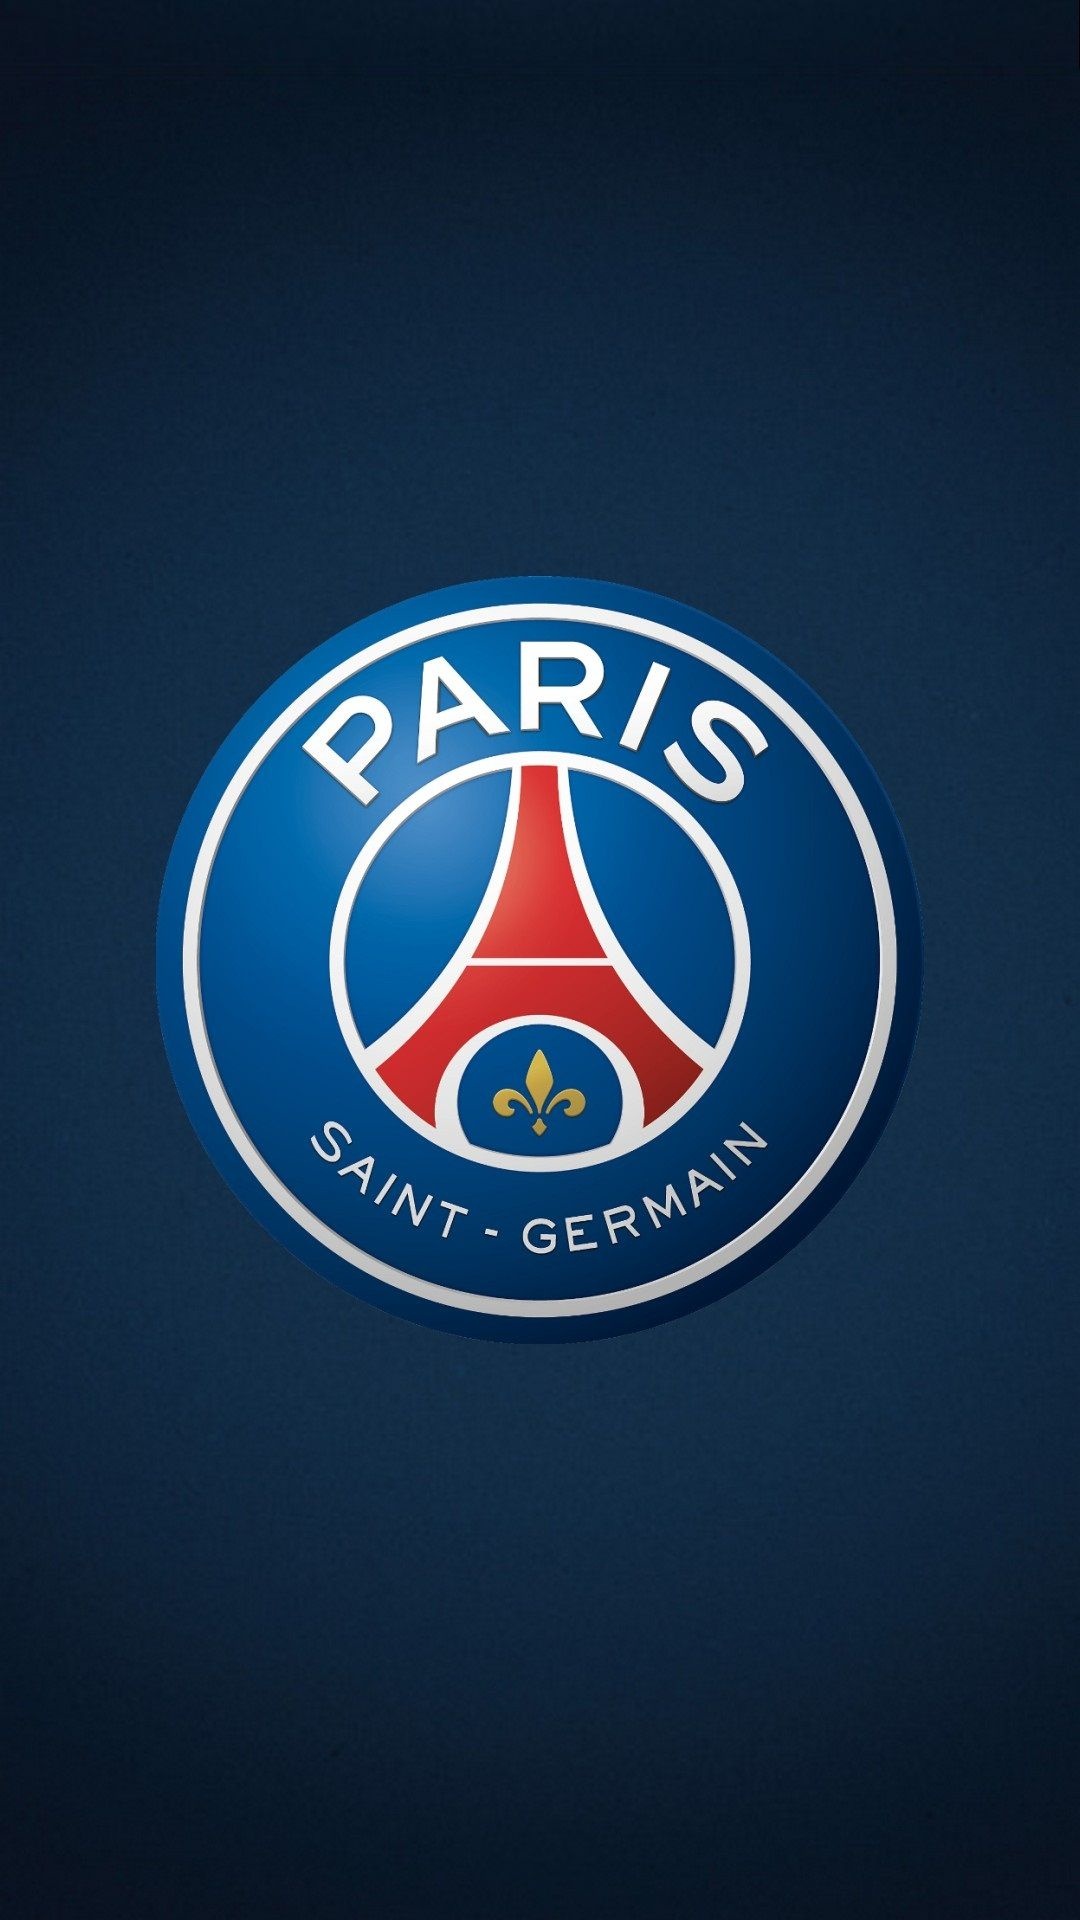 Paris Saint-Germain: One of the richest clubs in the world. 1080x1920 Full HD Wallpaper.